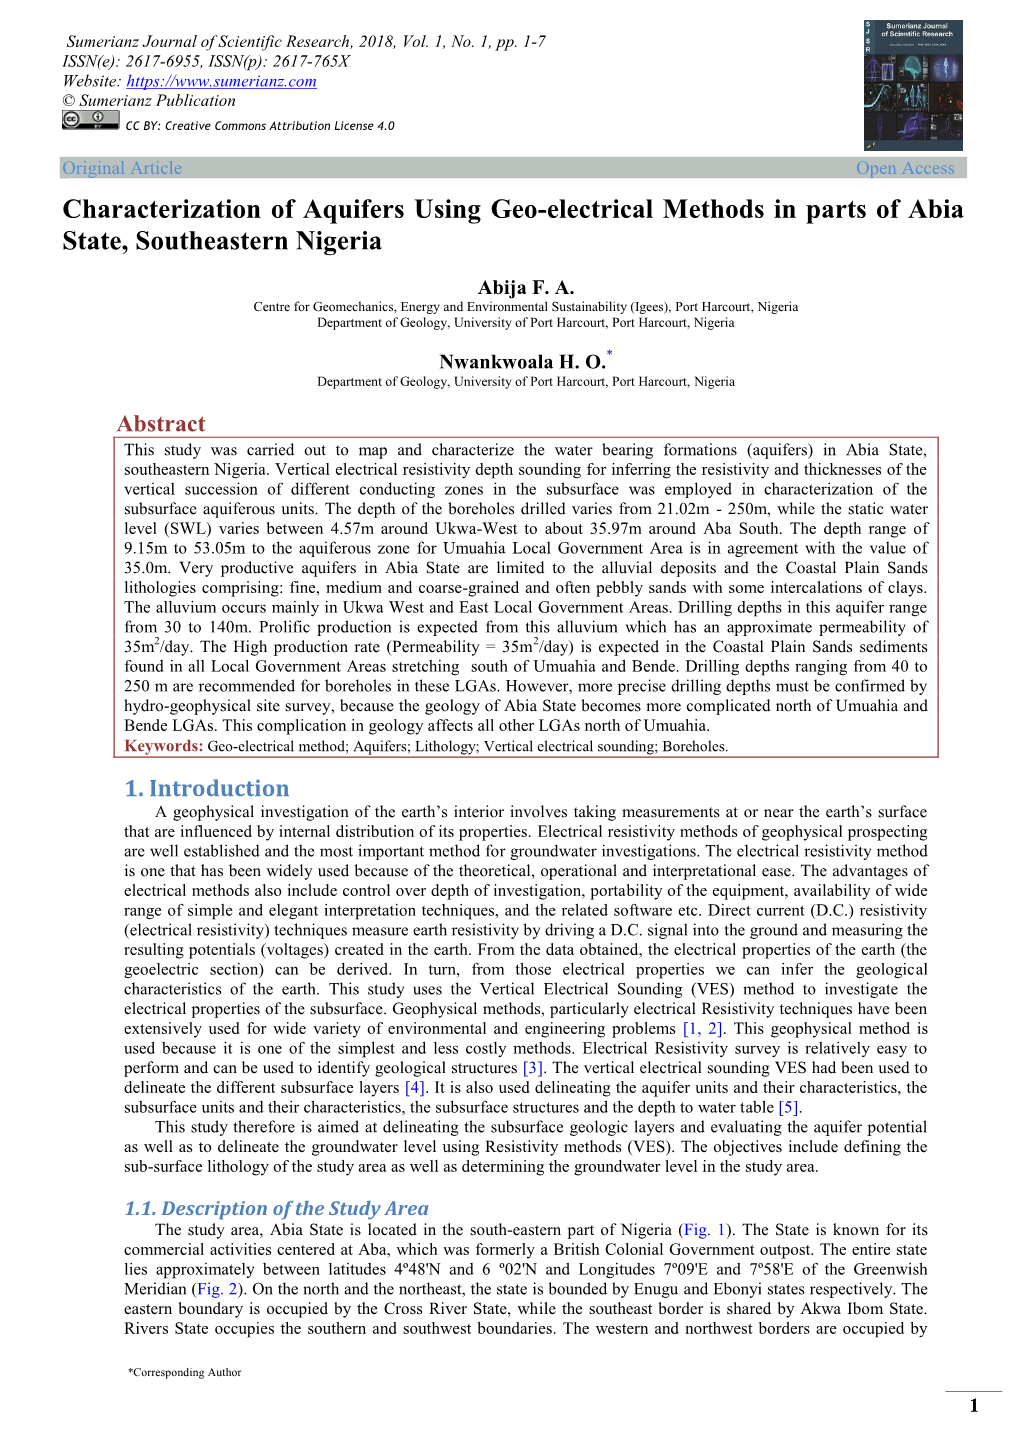 Characterization of Aquifers Using Geo-Electrical Methods in Parts of Abia State, Southeastern Nigeria